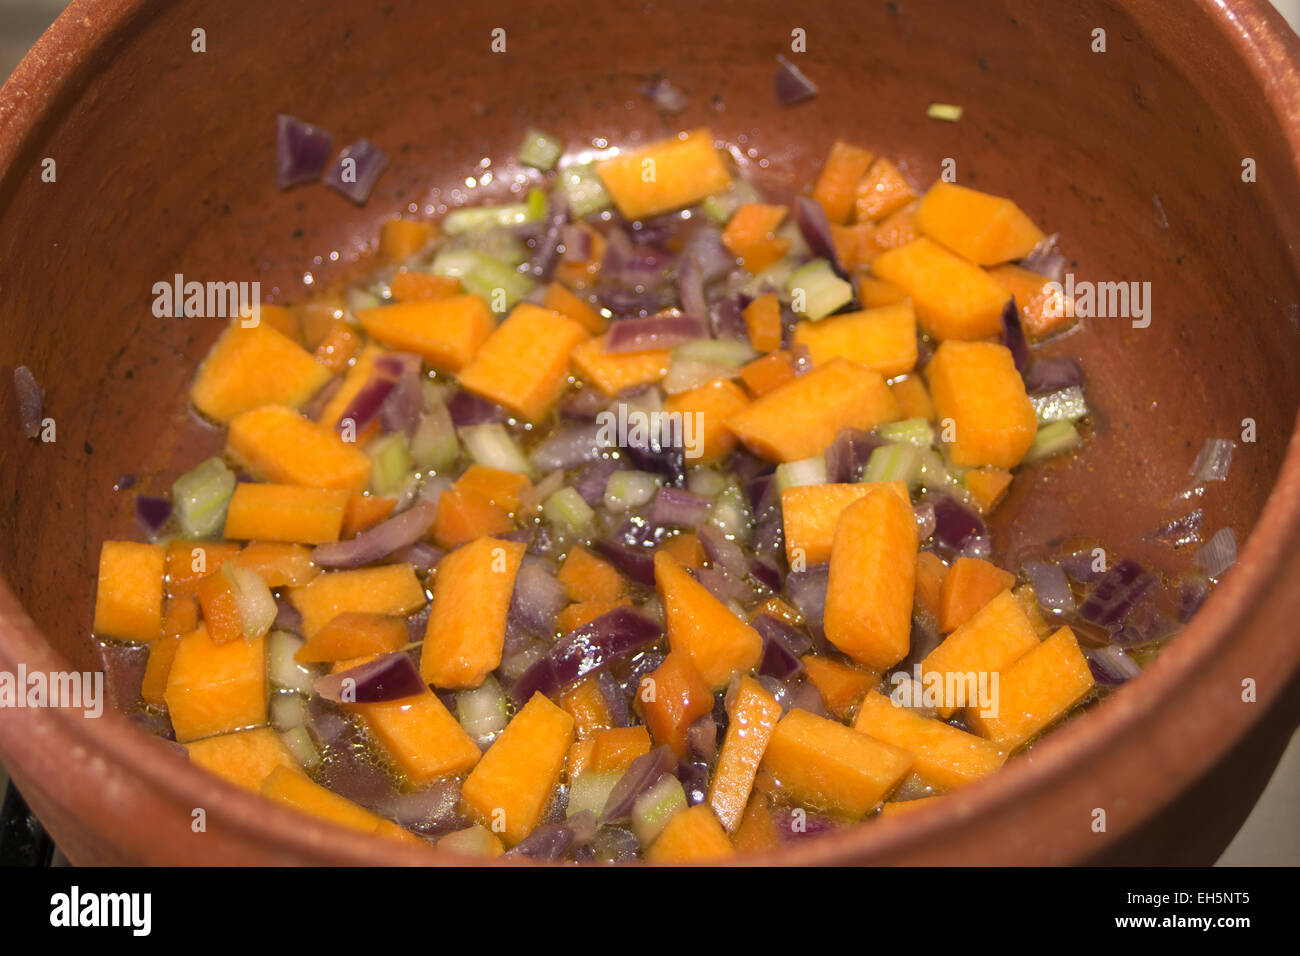 soup of cereals legumes and others vegetavles Stock Photo